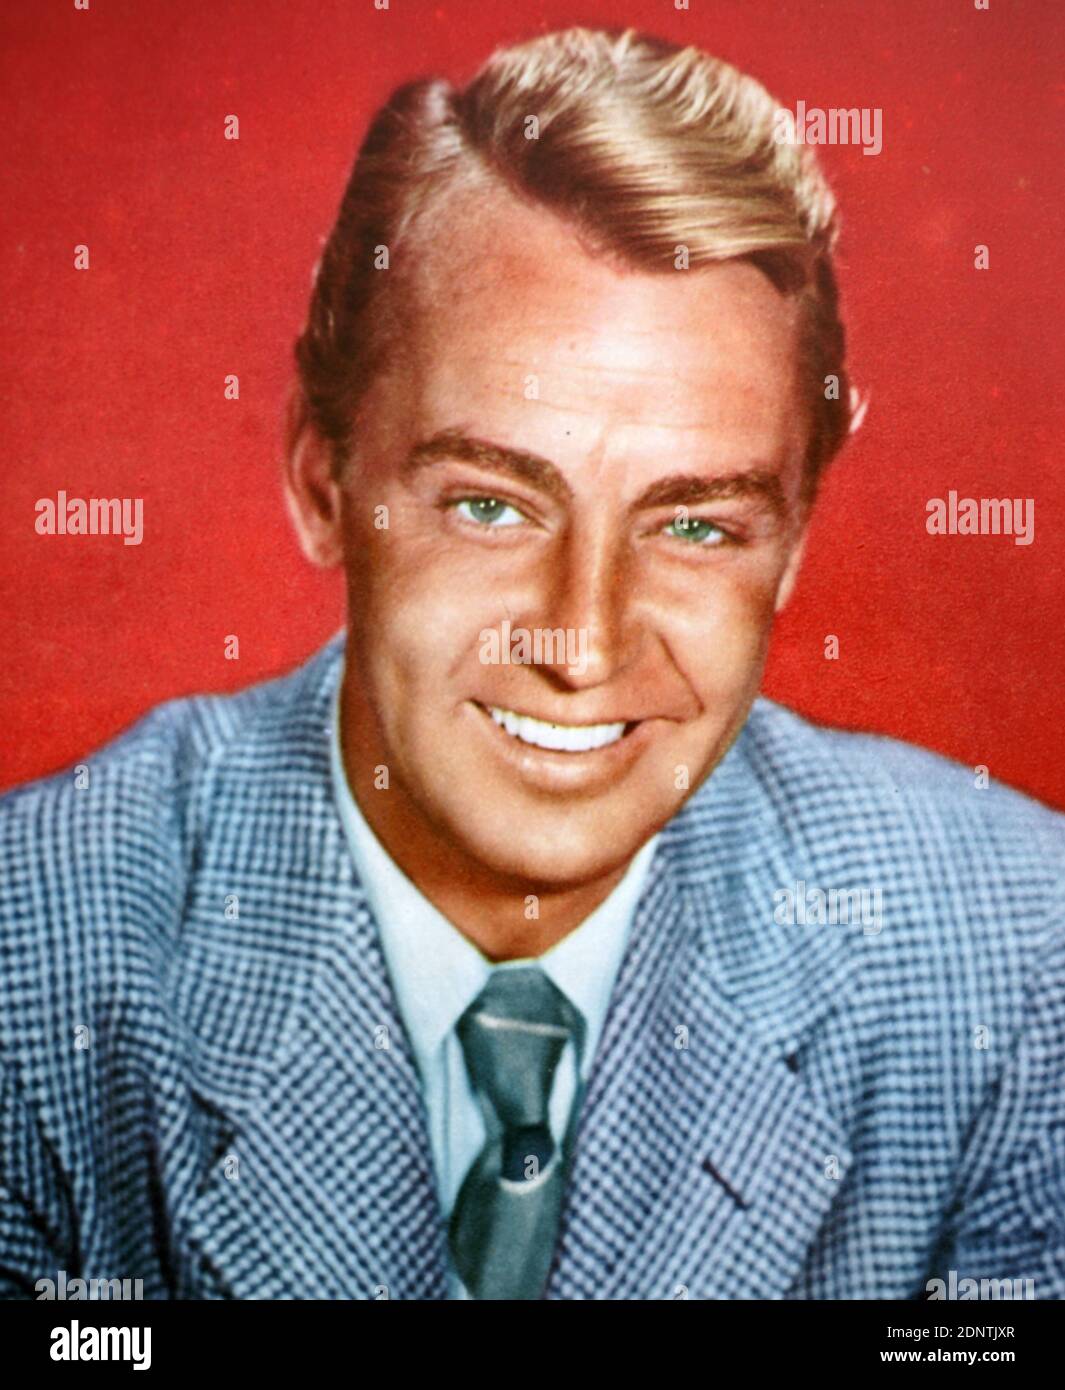 Photograph of Alan Ladd (1913-1964) an American actor and film and television producer. Stock Photo